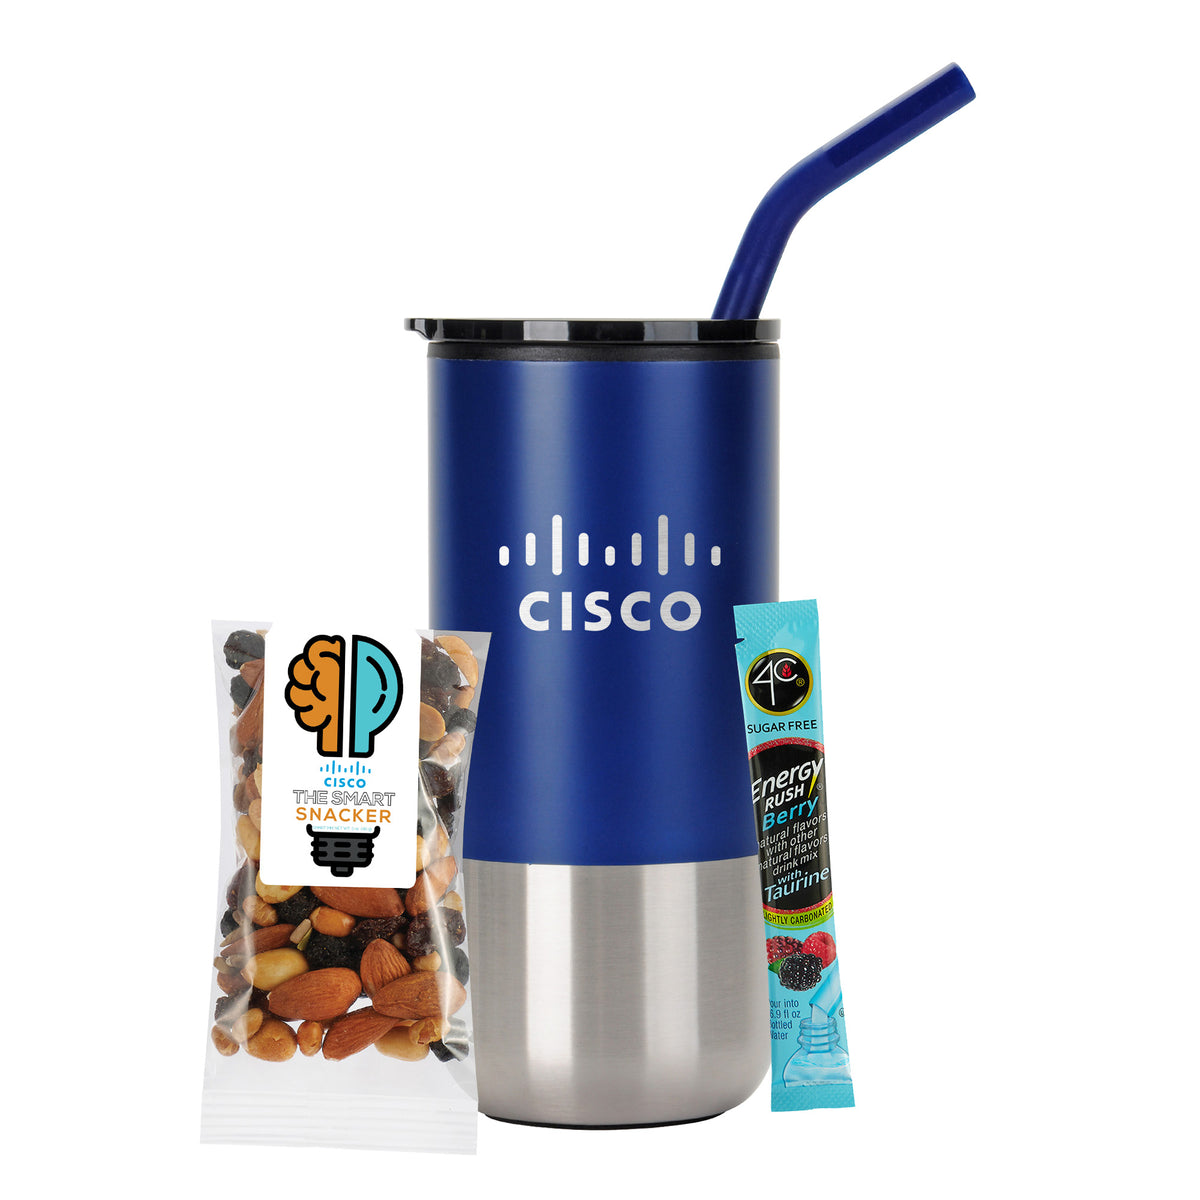 Tumbler w/ Stainless Steel Straw - 16 oz., 4C® Sugar Free Energy Rush Packet &amp; Snack Pack with Smart Mix